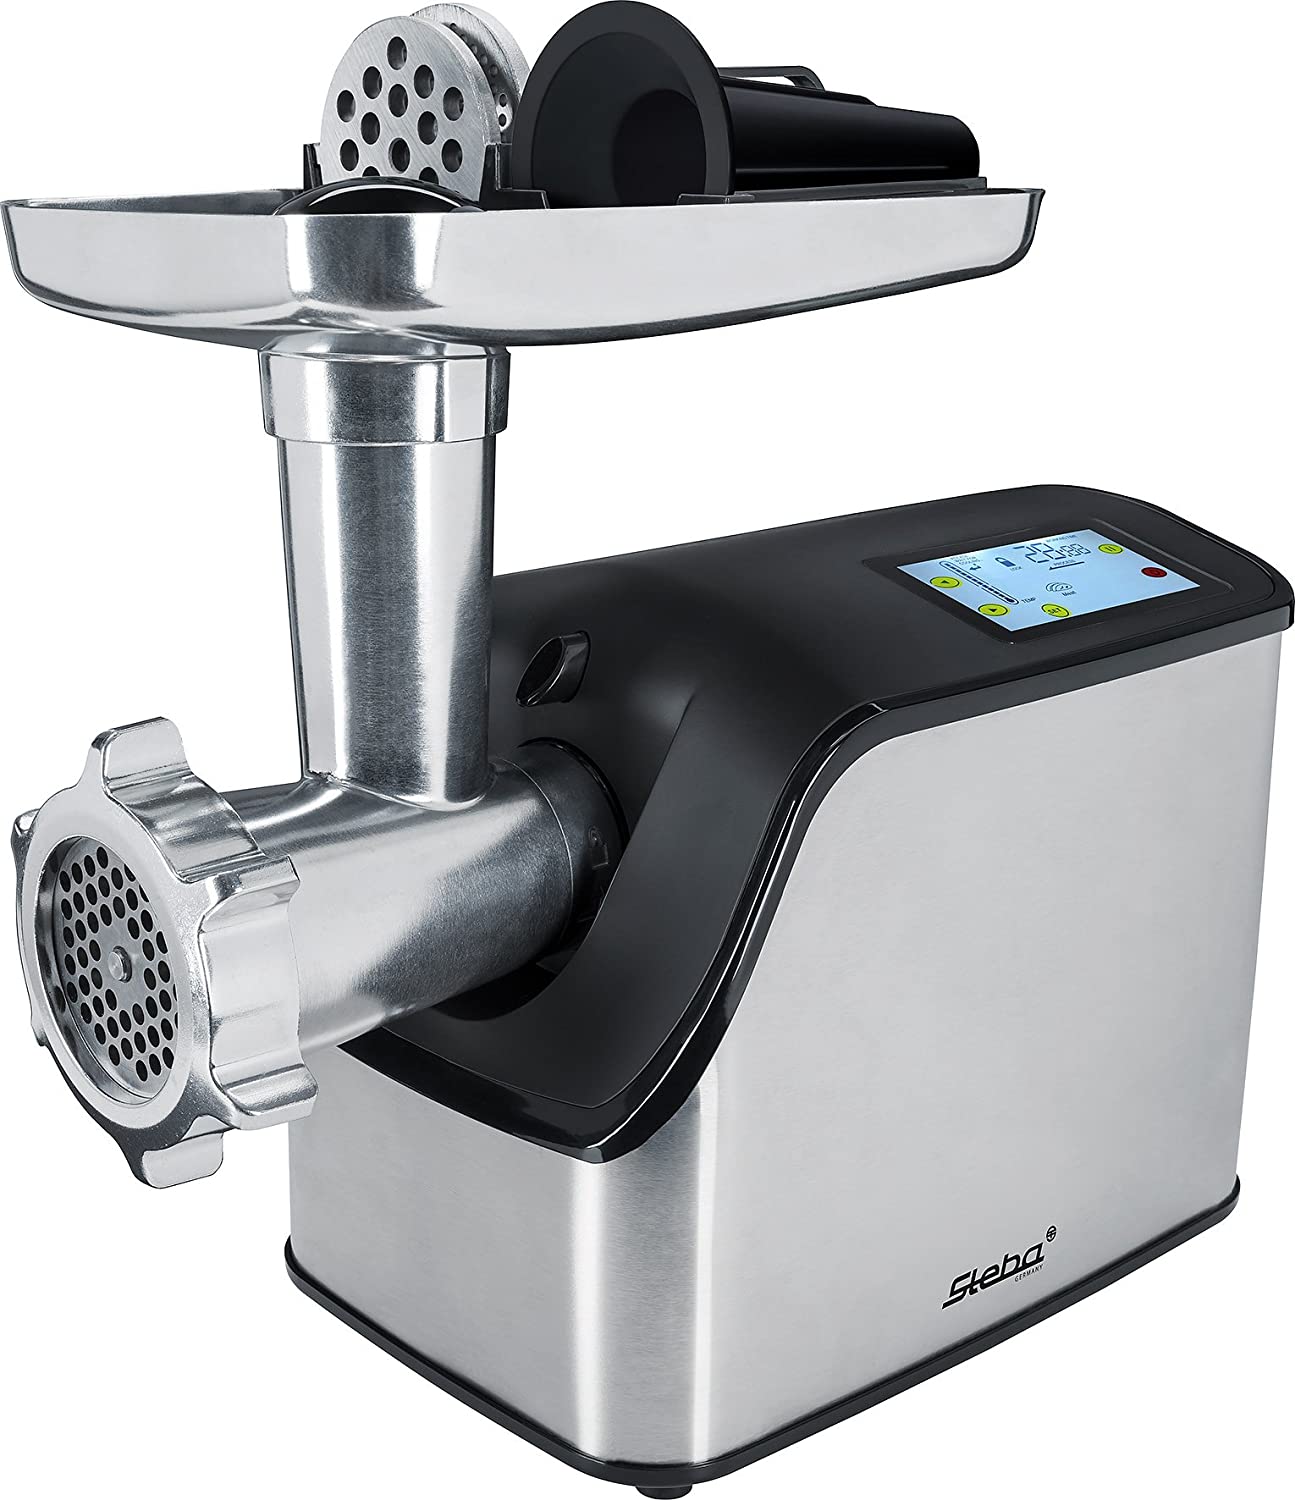 Steba MG 1600 V6 Electronic Grinder 6 Automatic Programs with Temperature Display – 700 W